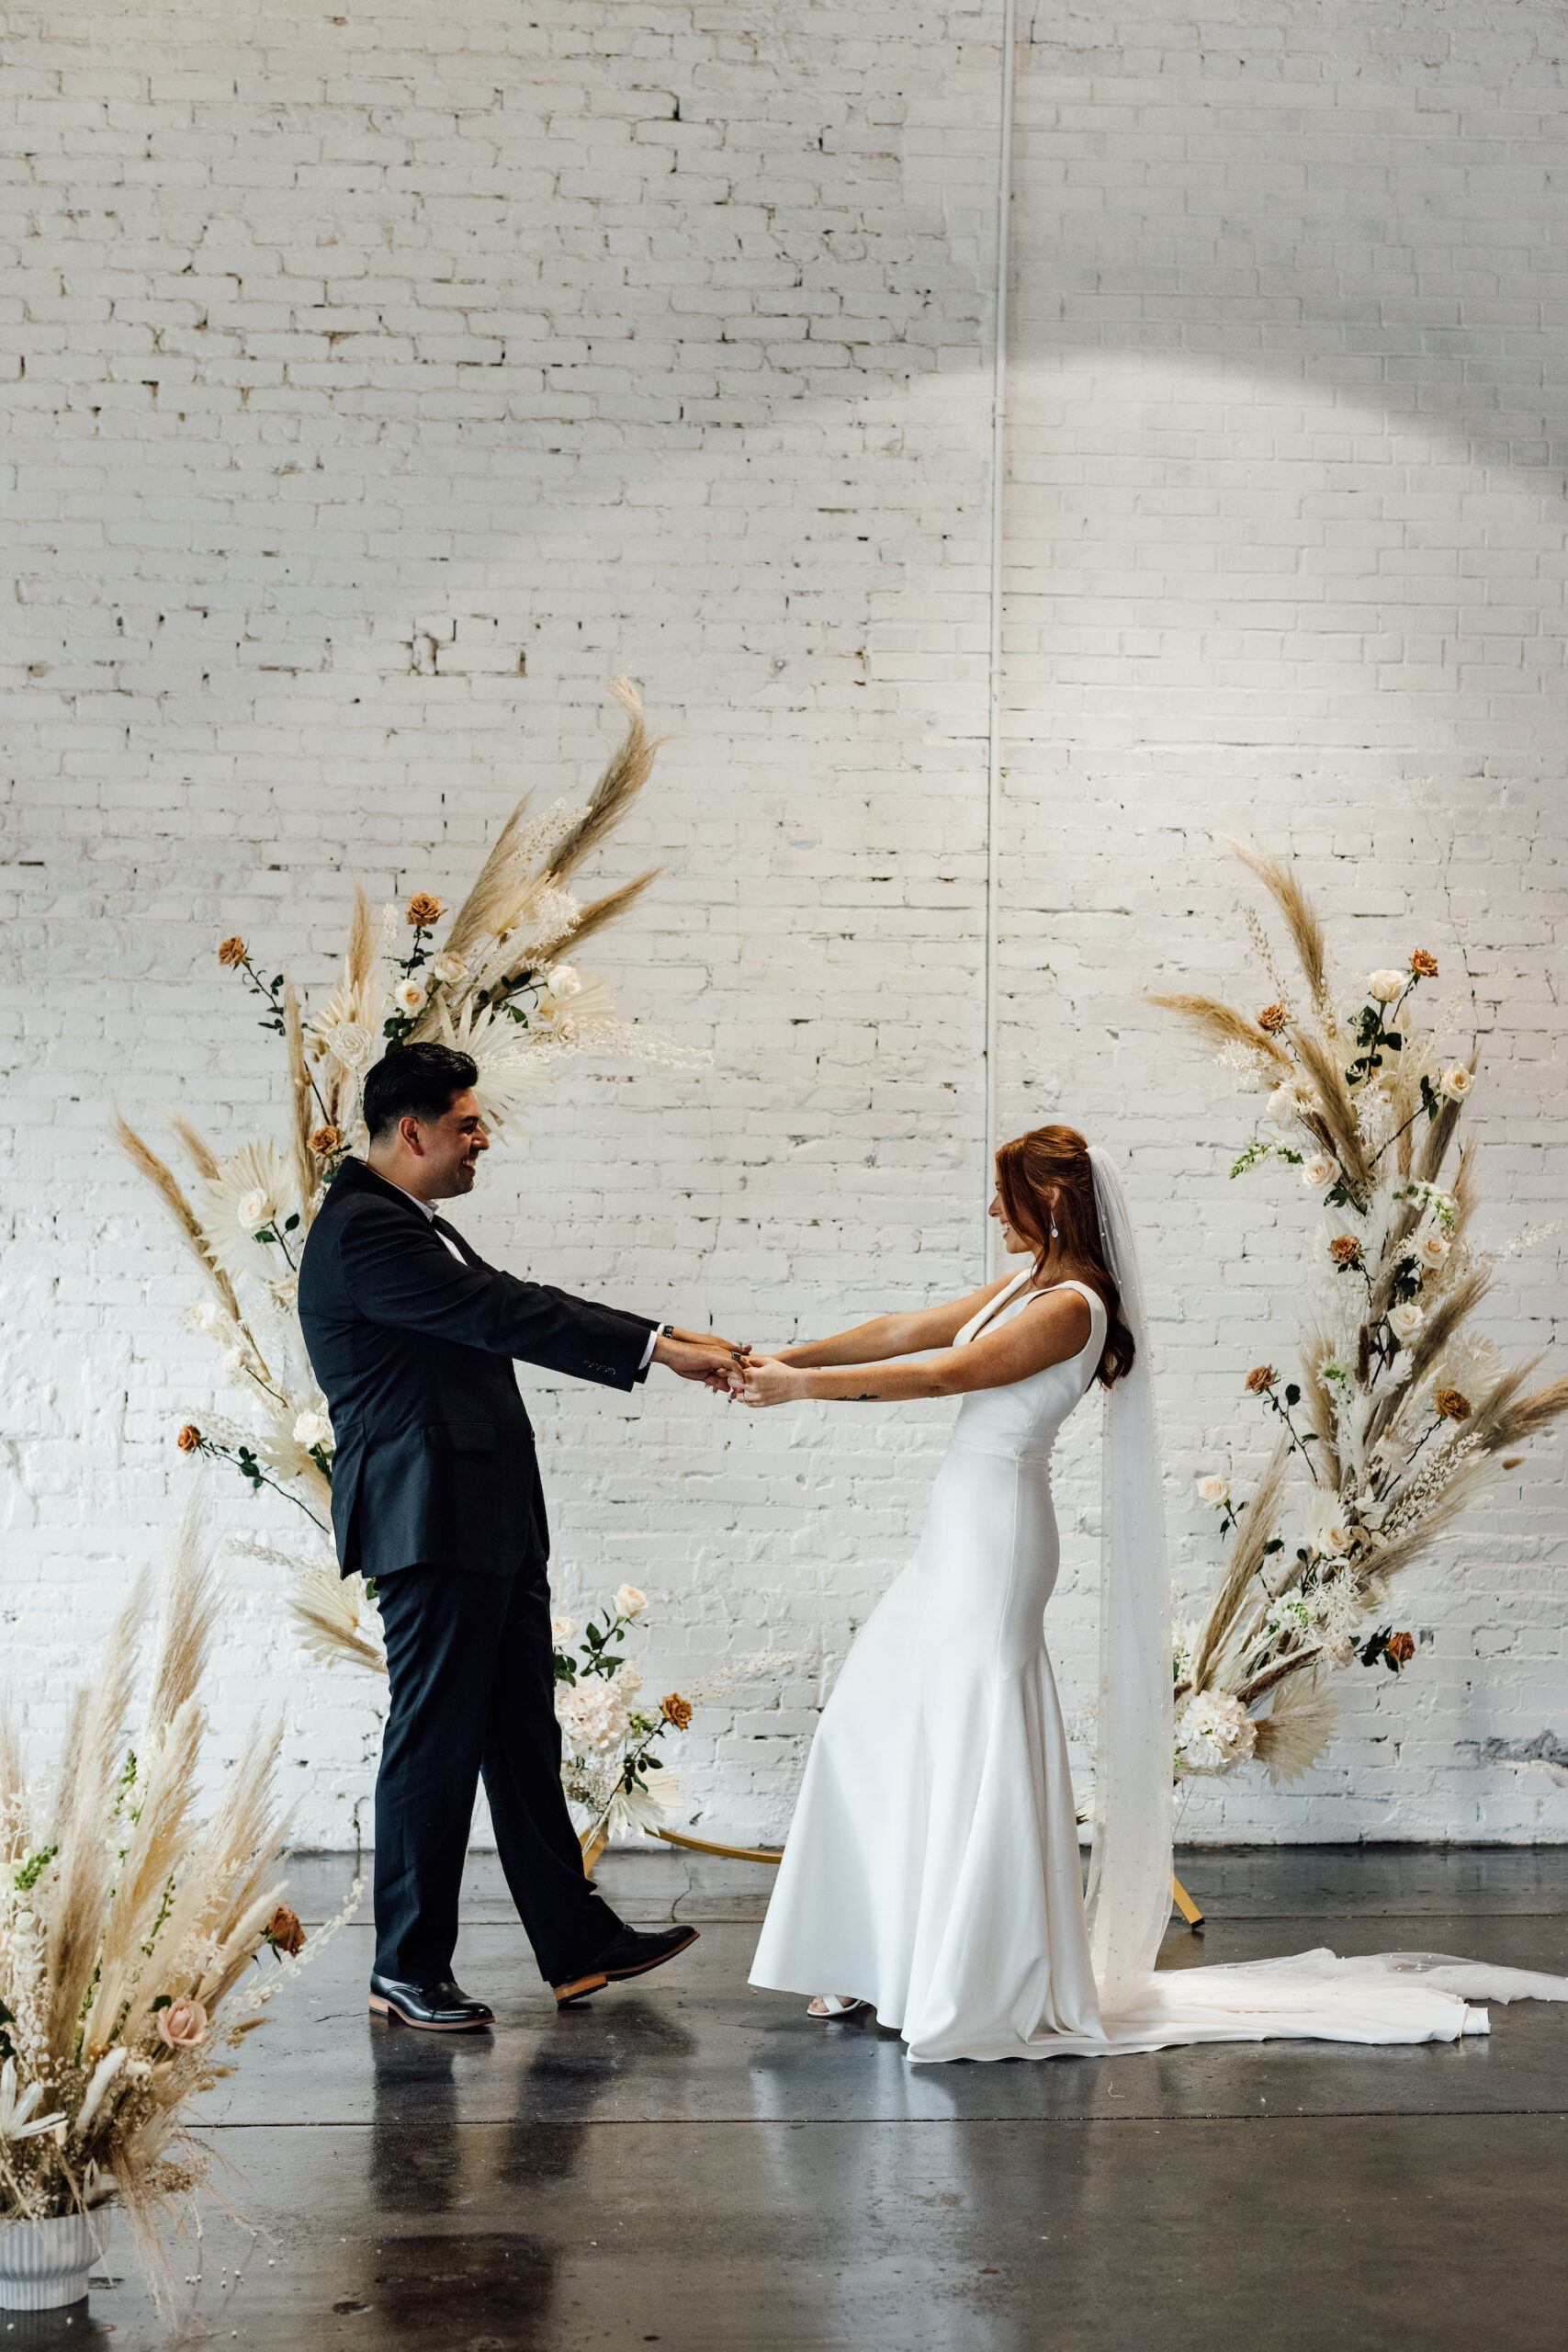 Bride and Groom First Look Wedding Portrait | Indoor Wedding Ceremony | Asymmetrical Round Boho Arch with Boho Pampas Grass White Palm Frond Floral Arrangements | Lakeland Industrial Wedding Venue with White Brick Walls Haus 820